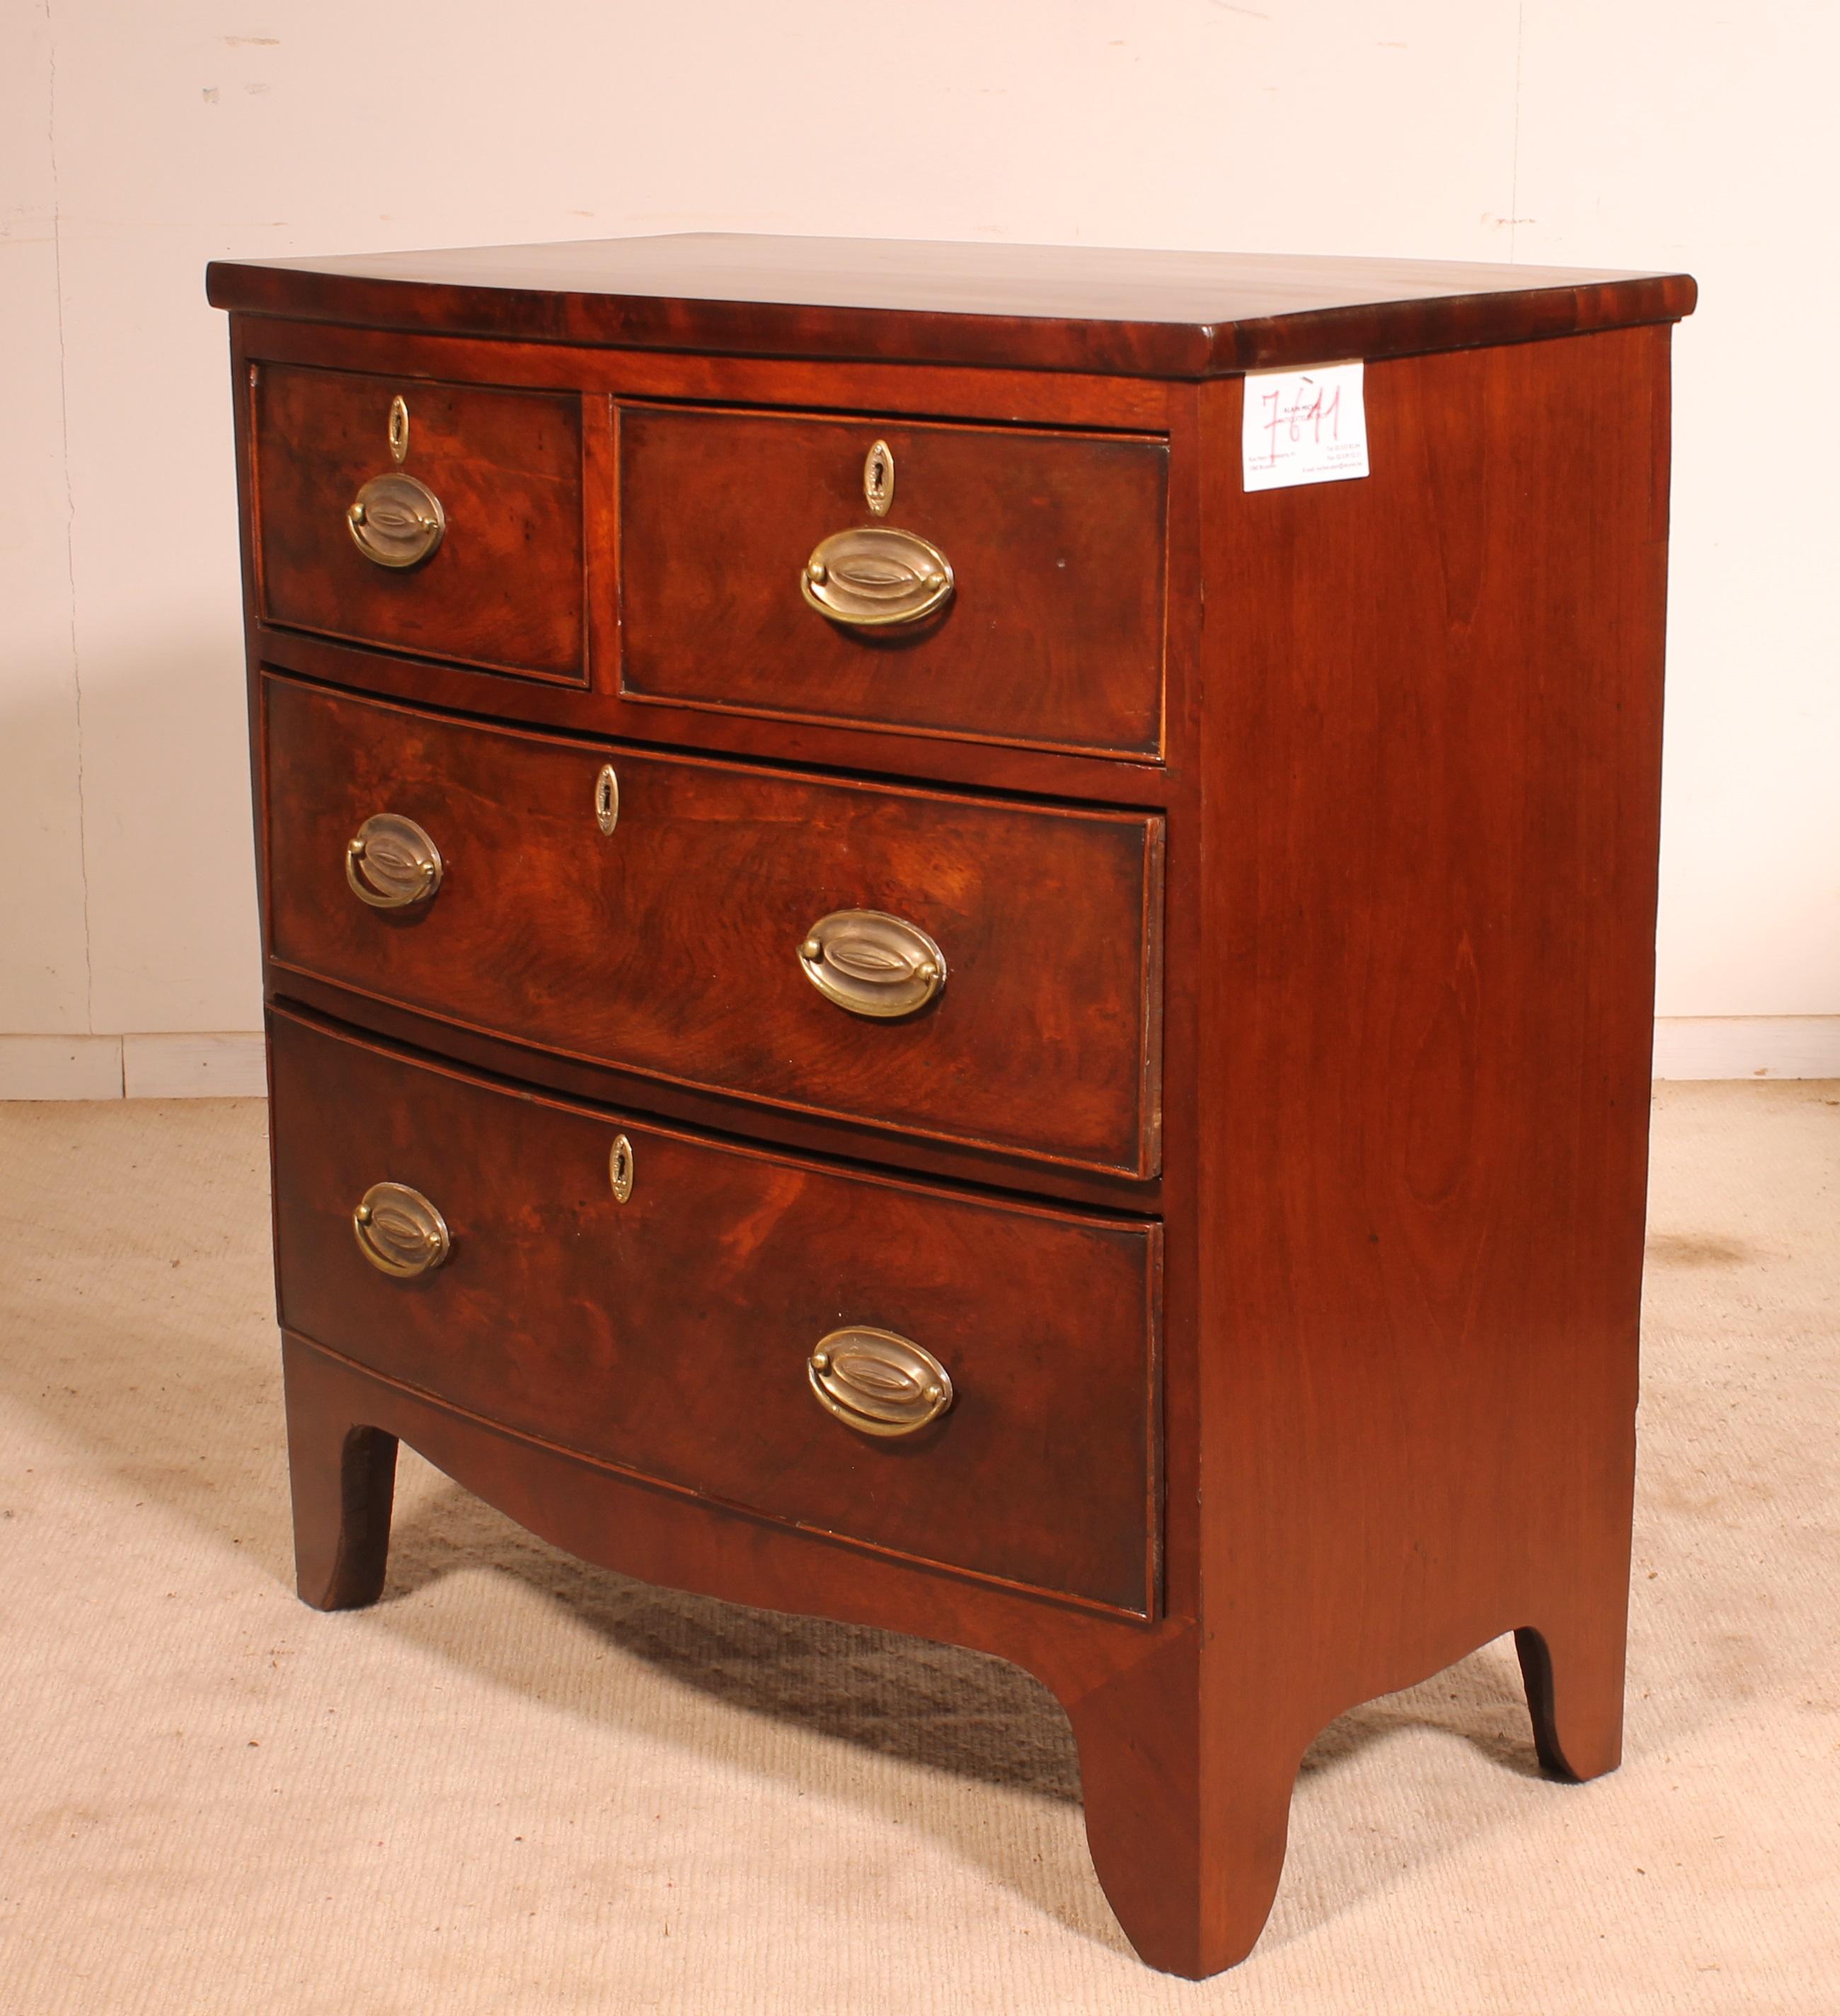 Regency Small Bowfornt Mahogany Chest of Drawers 19th Century England